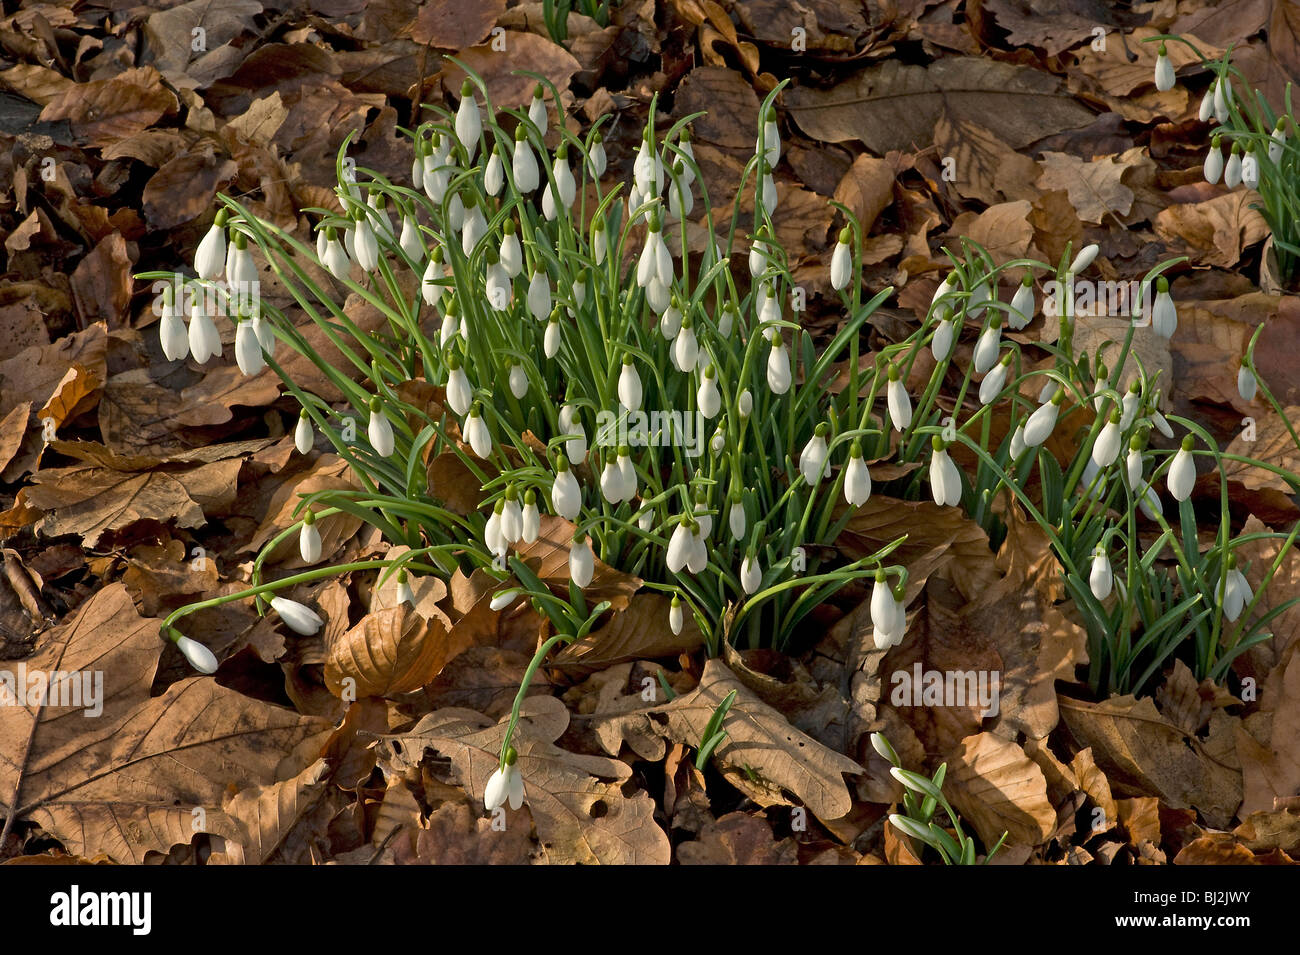 Snowdrops, Galanthus nivalis, emerge through the leaf litter in January Stock Photo